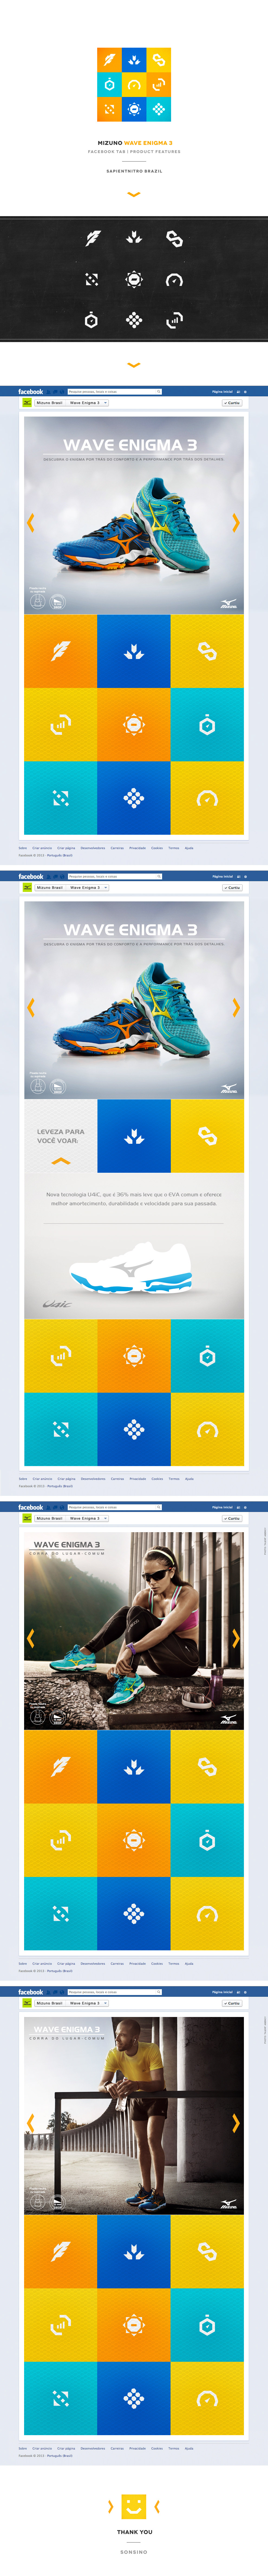 running shoes Mizuno wave enigma 3 Facebook tab app product features sport Technology run